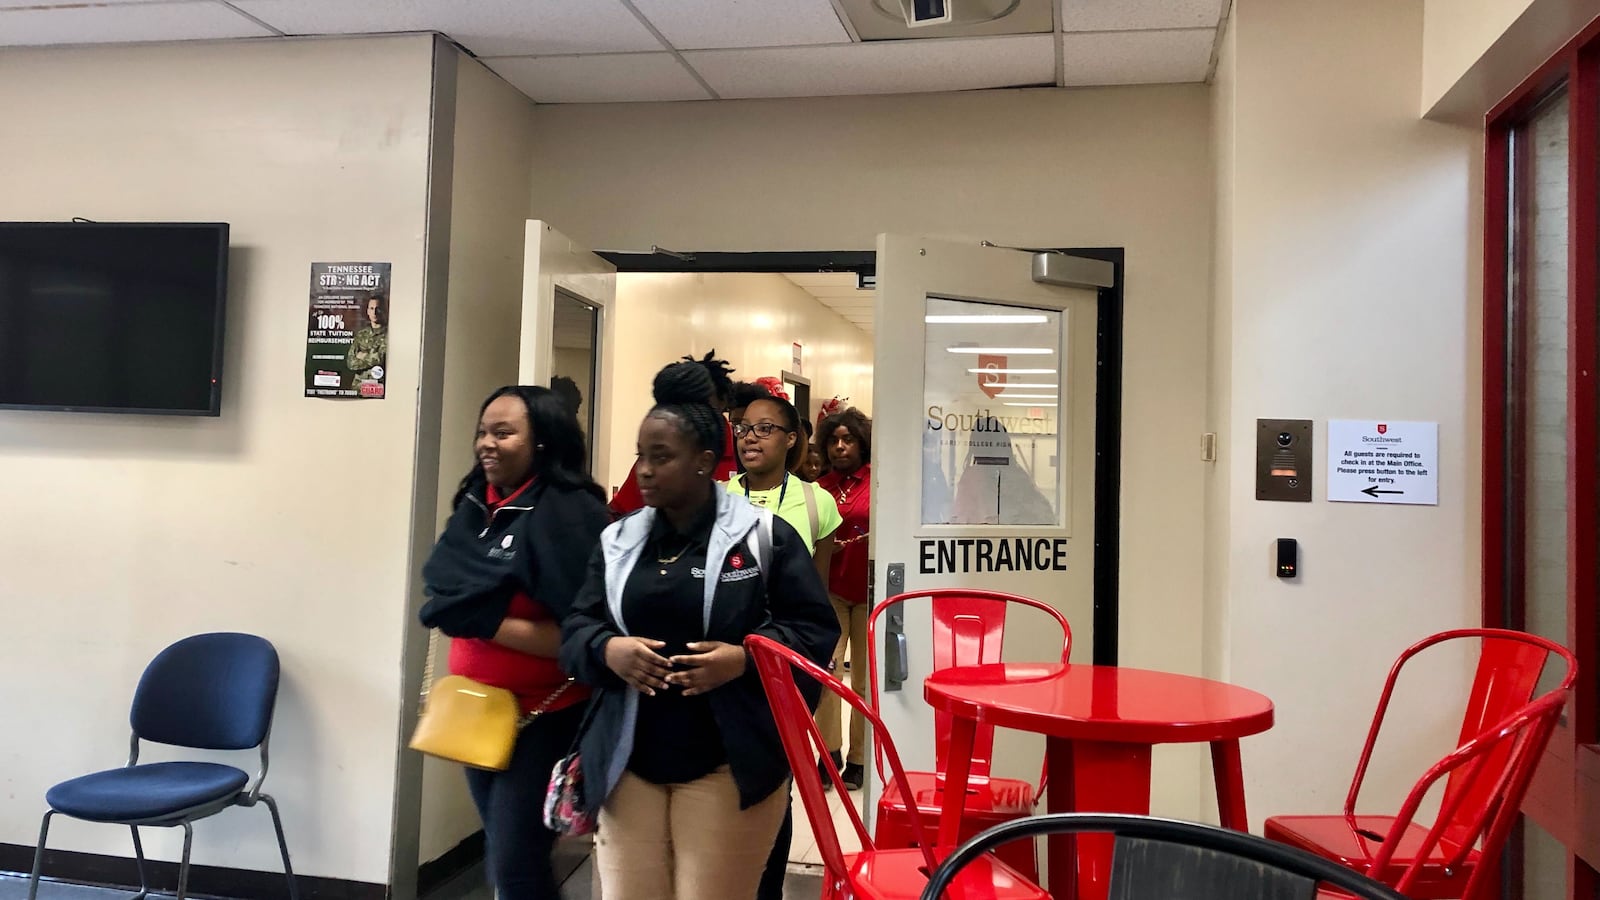 Students get ready to go home after a day of classes at Southwest Early College High School.